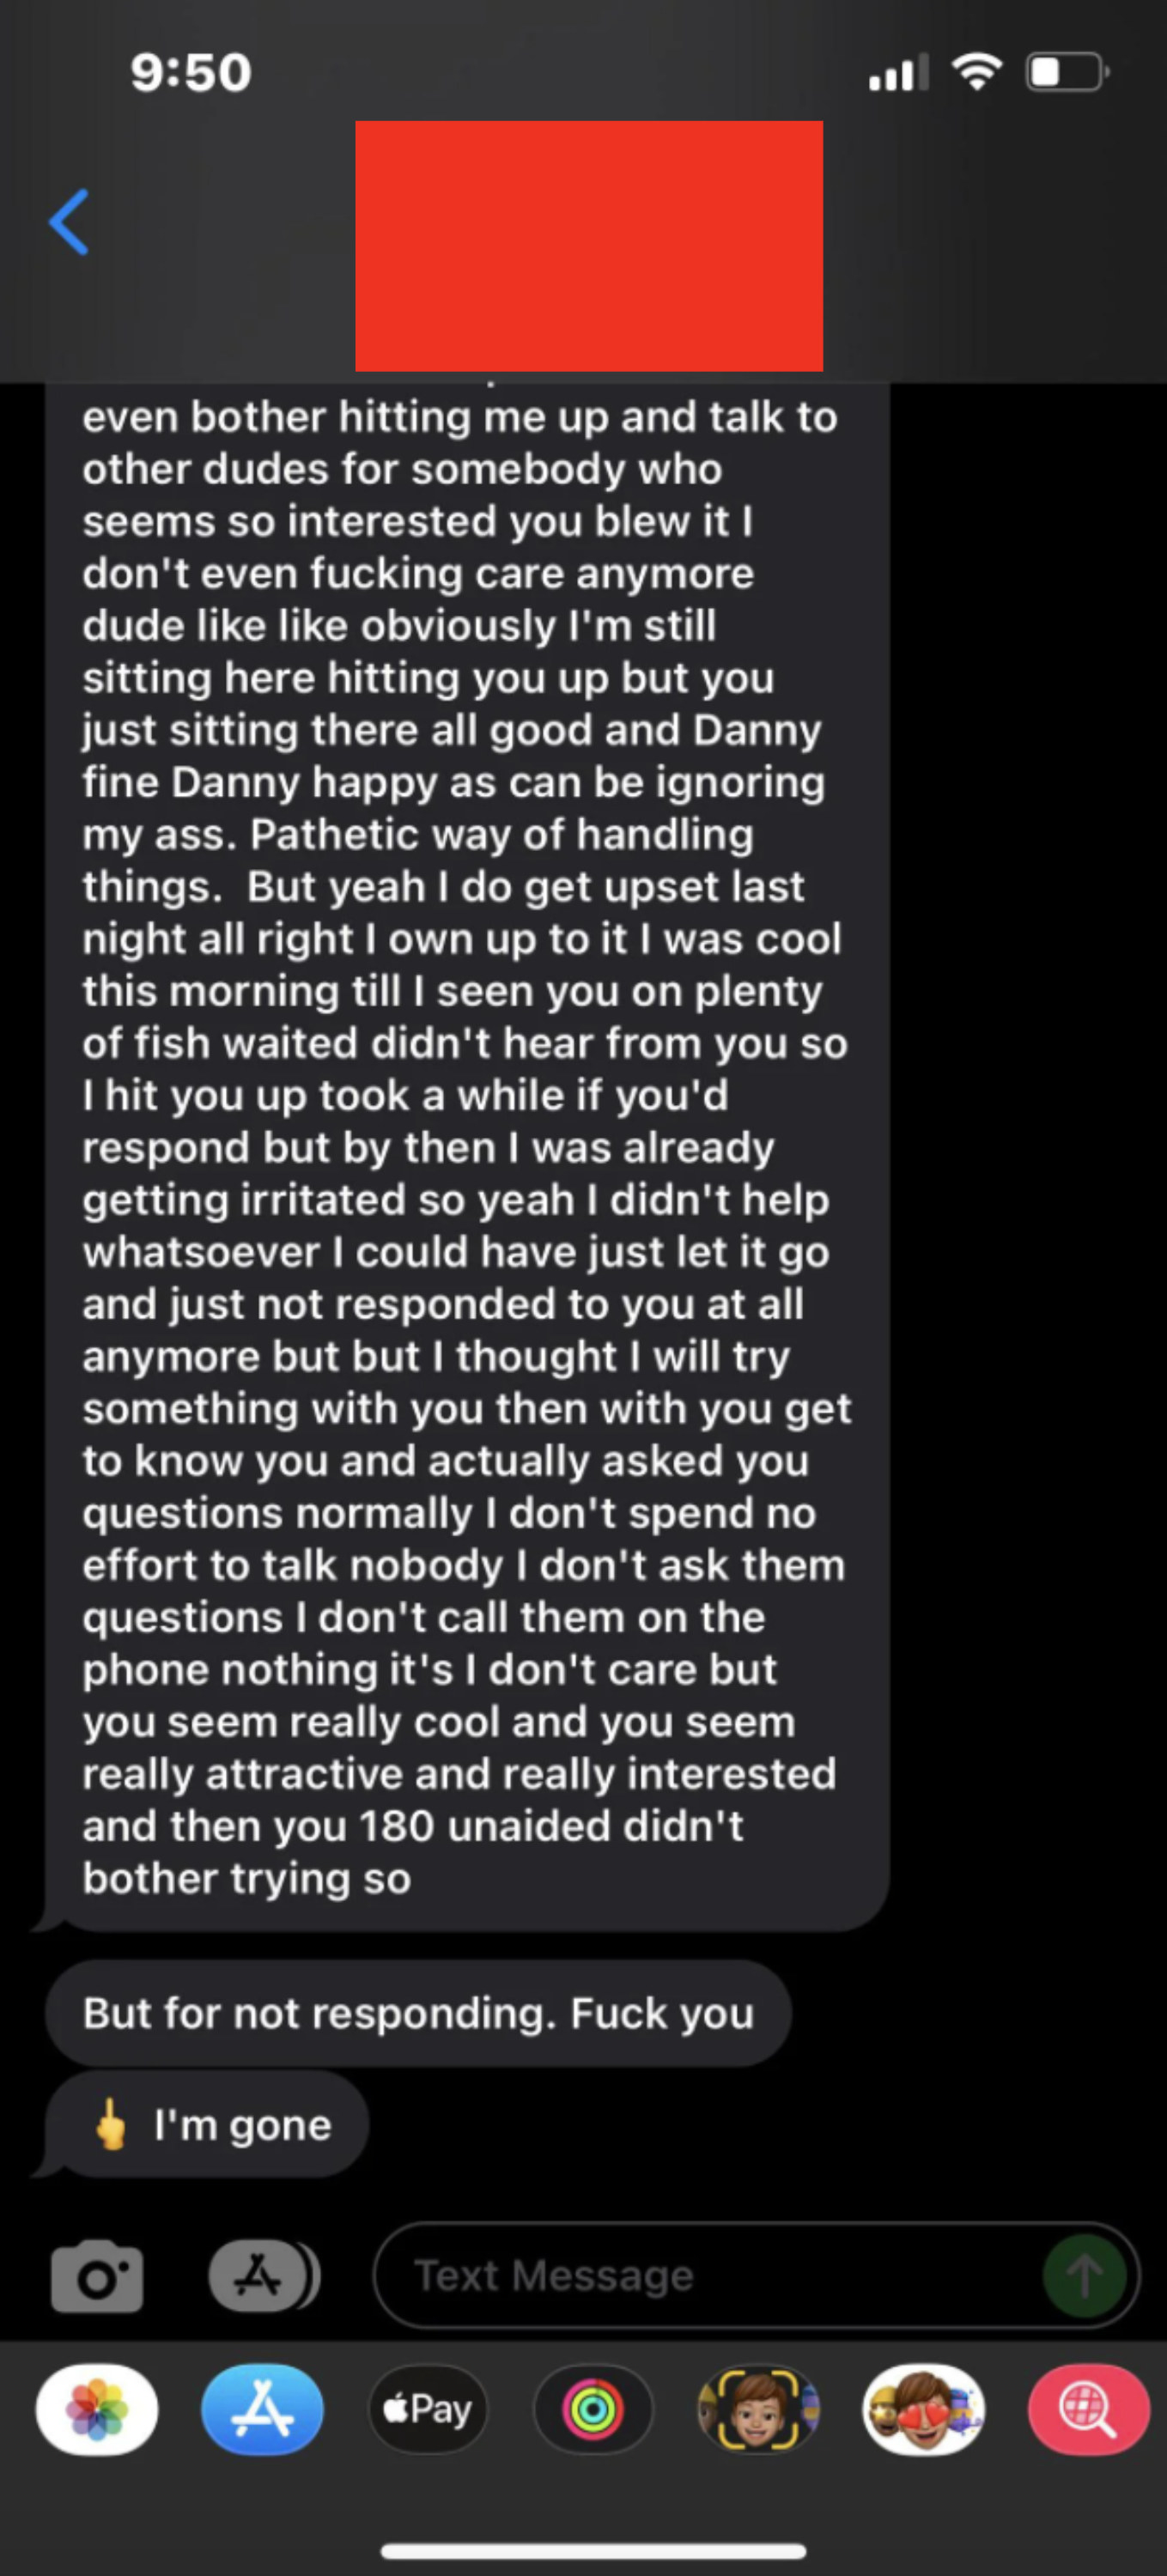 &quot;Nice guy:&quot; &quot;You seem really attractive and really interested and then you 180 unaided didn&#x27;t bother trying so fuck you&quot;